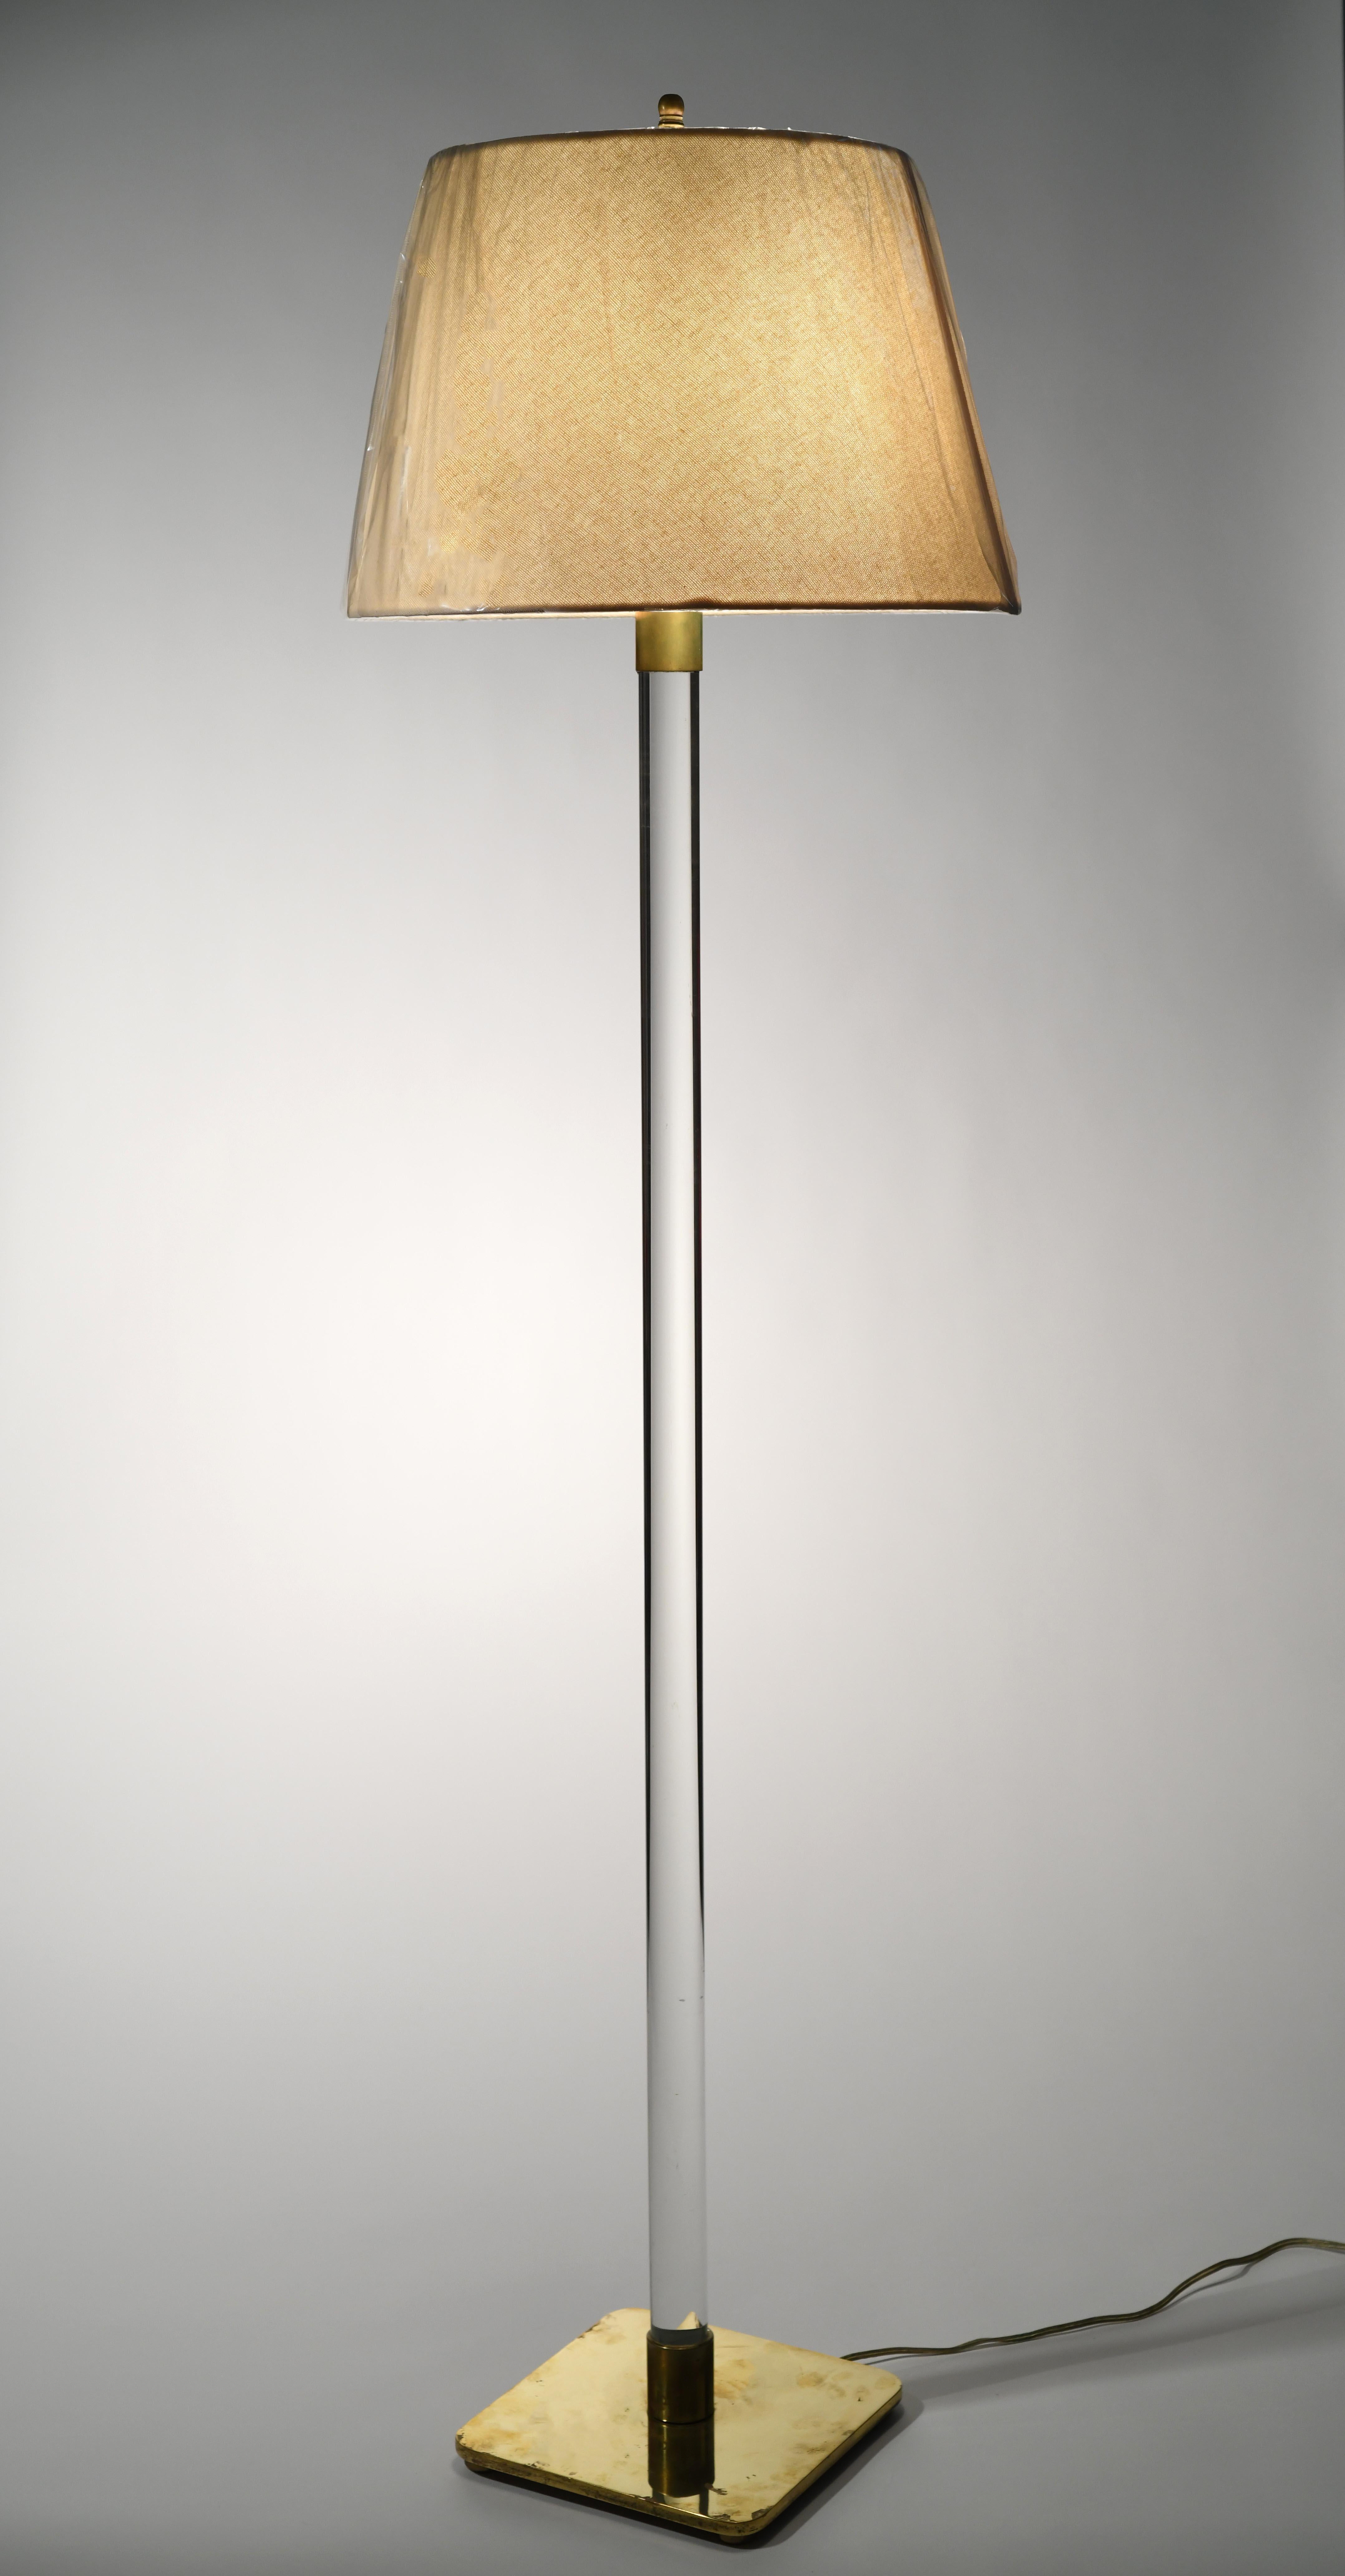 1970s Hansen floor lamp with glass rod and brass base. Spin switch lights 1, 2 or 3 bulbs. Signed to underside 'Hansen Lamps New York